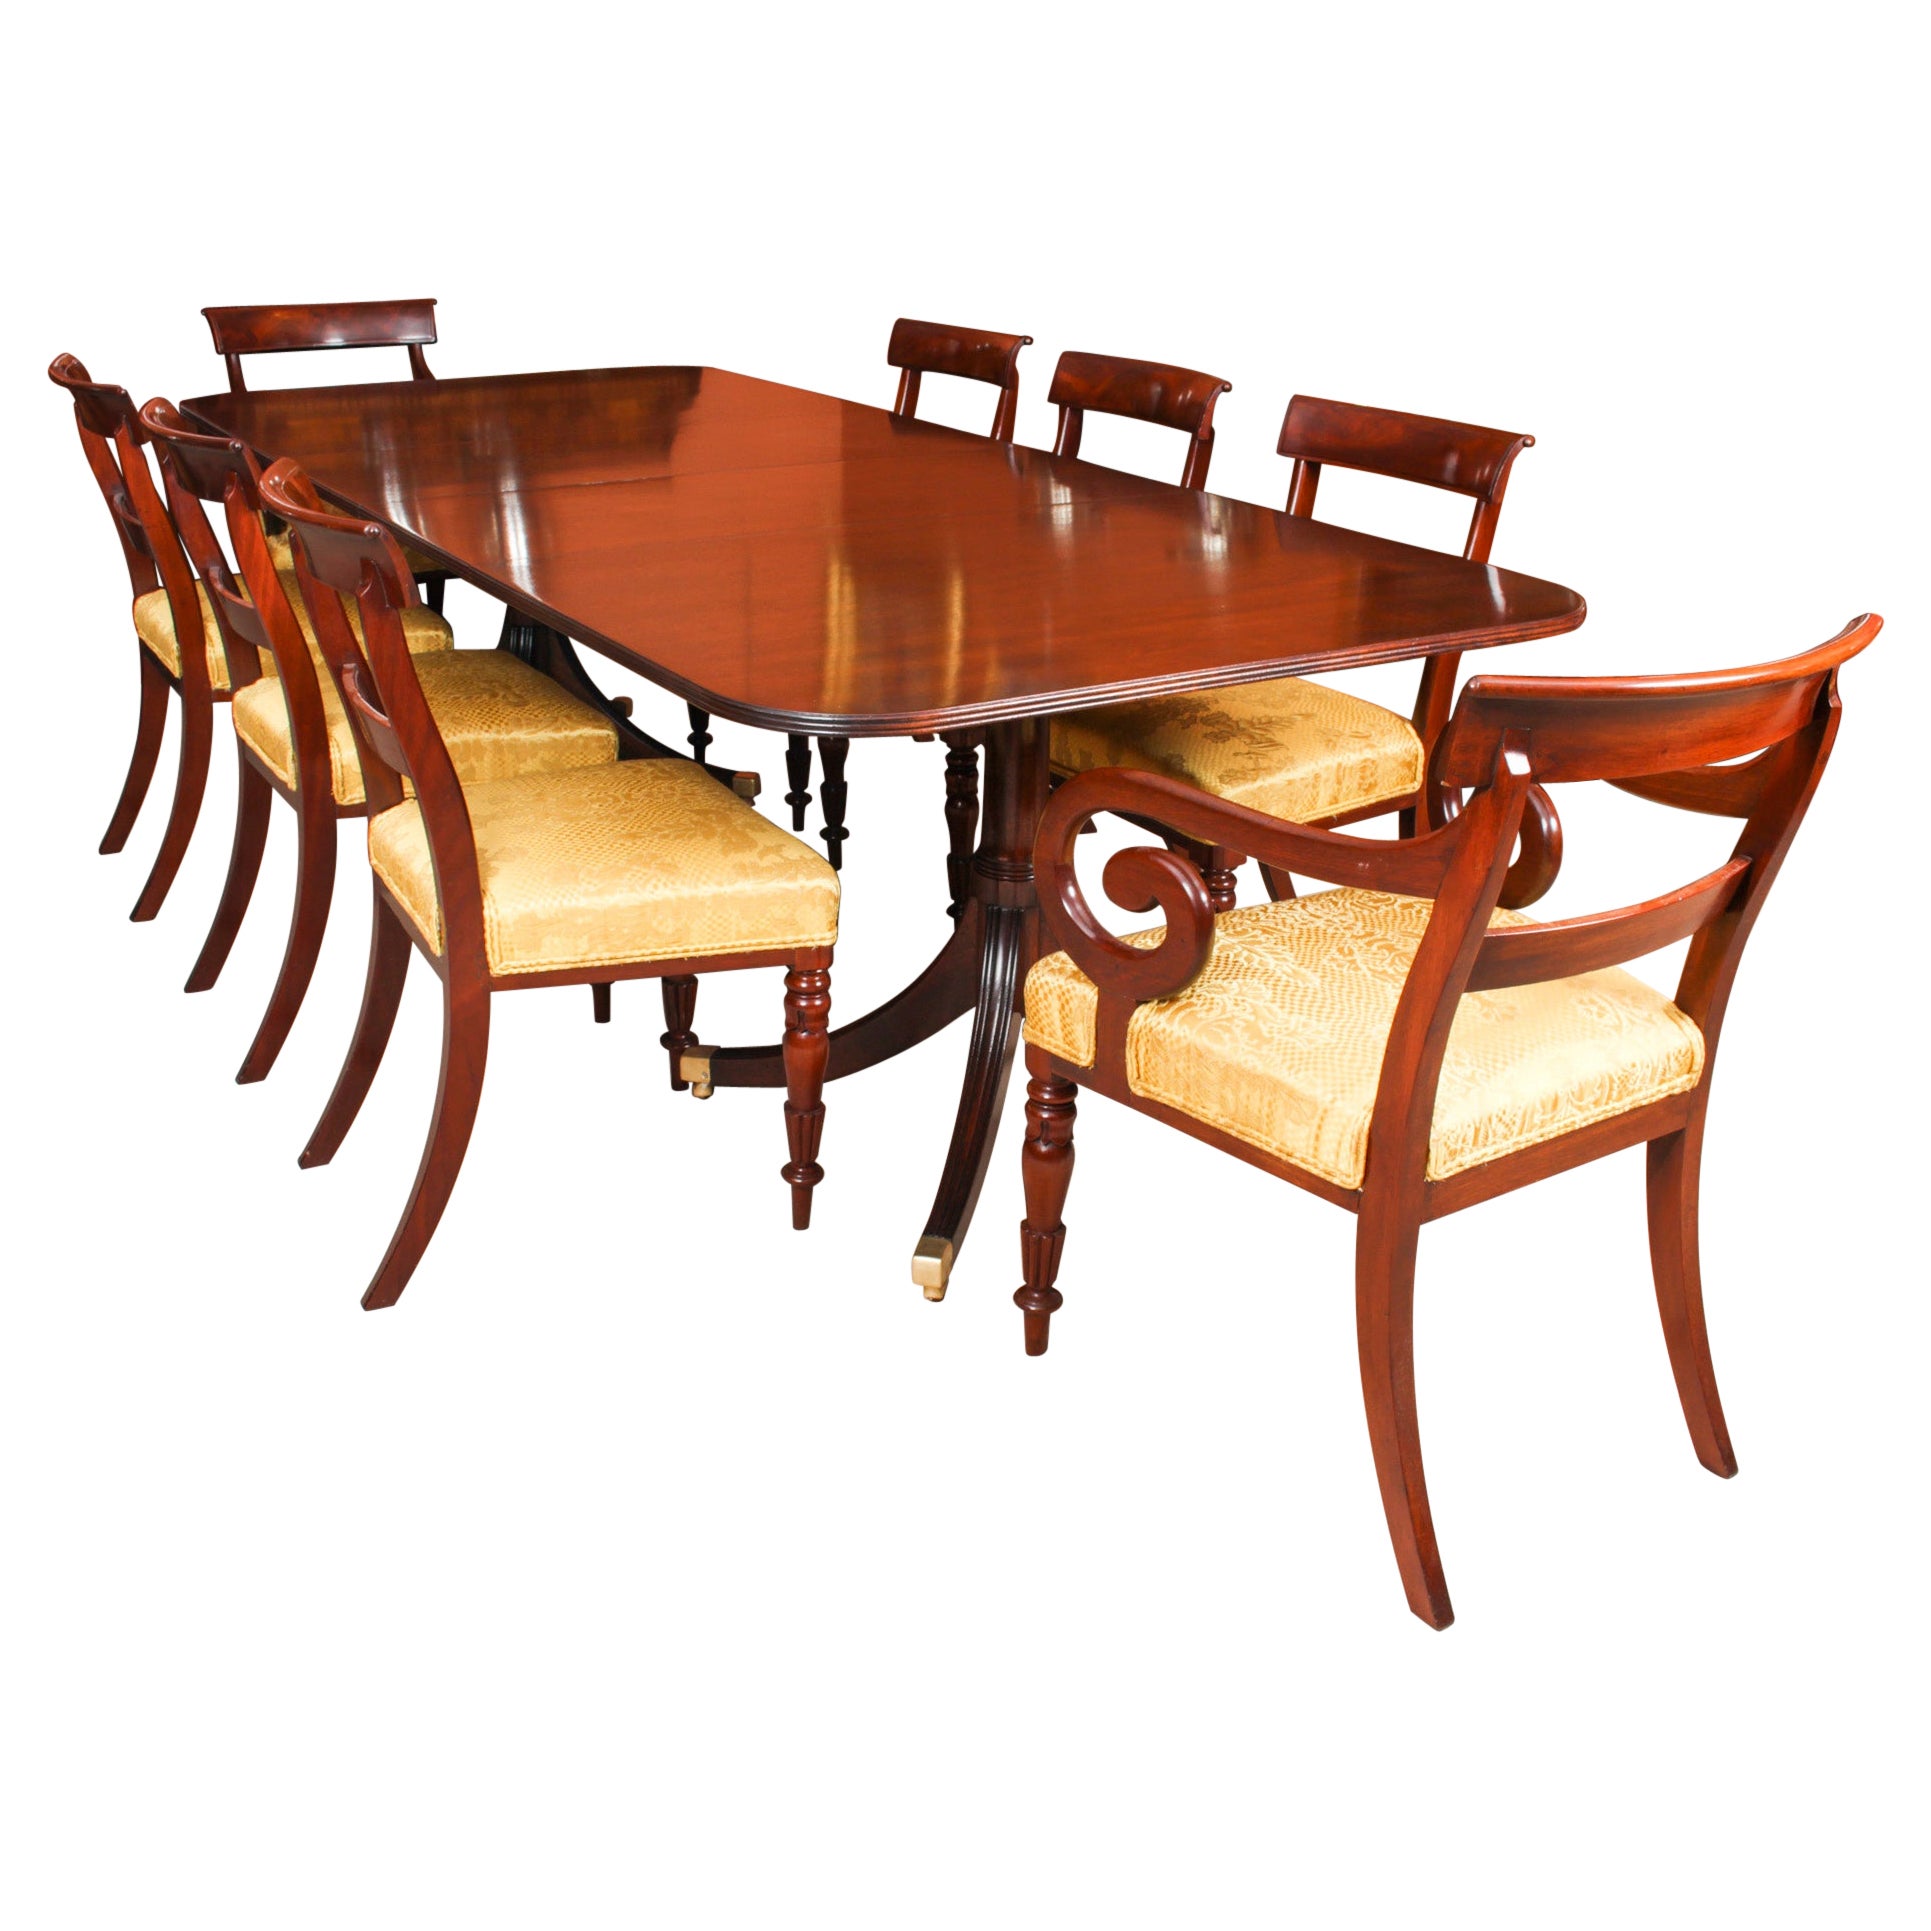 Vintage Twin Pillar Dining Table by William Tillman 20C & 8 Chairs 19th C